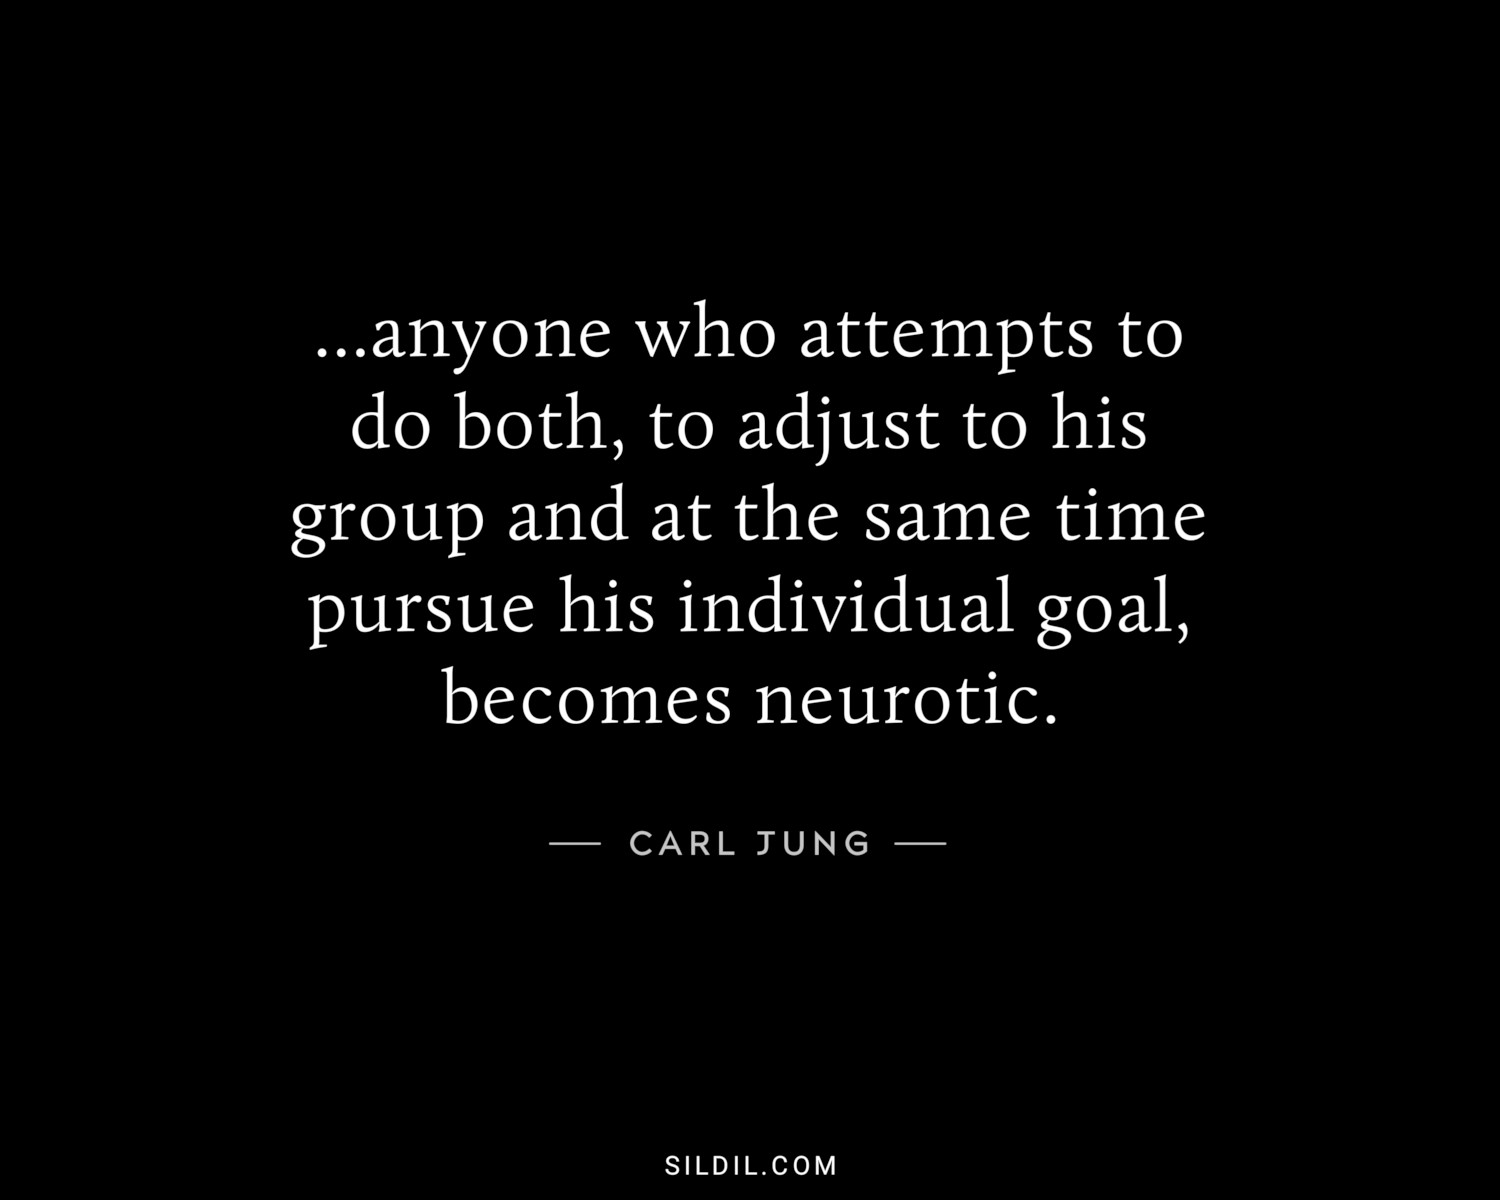 ...anyone who attempts to do both, to adjust to his group and at the same time pursue his individual goal, becomes neurotic.